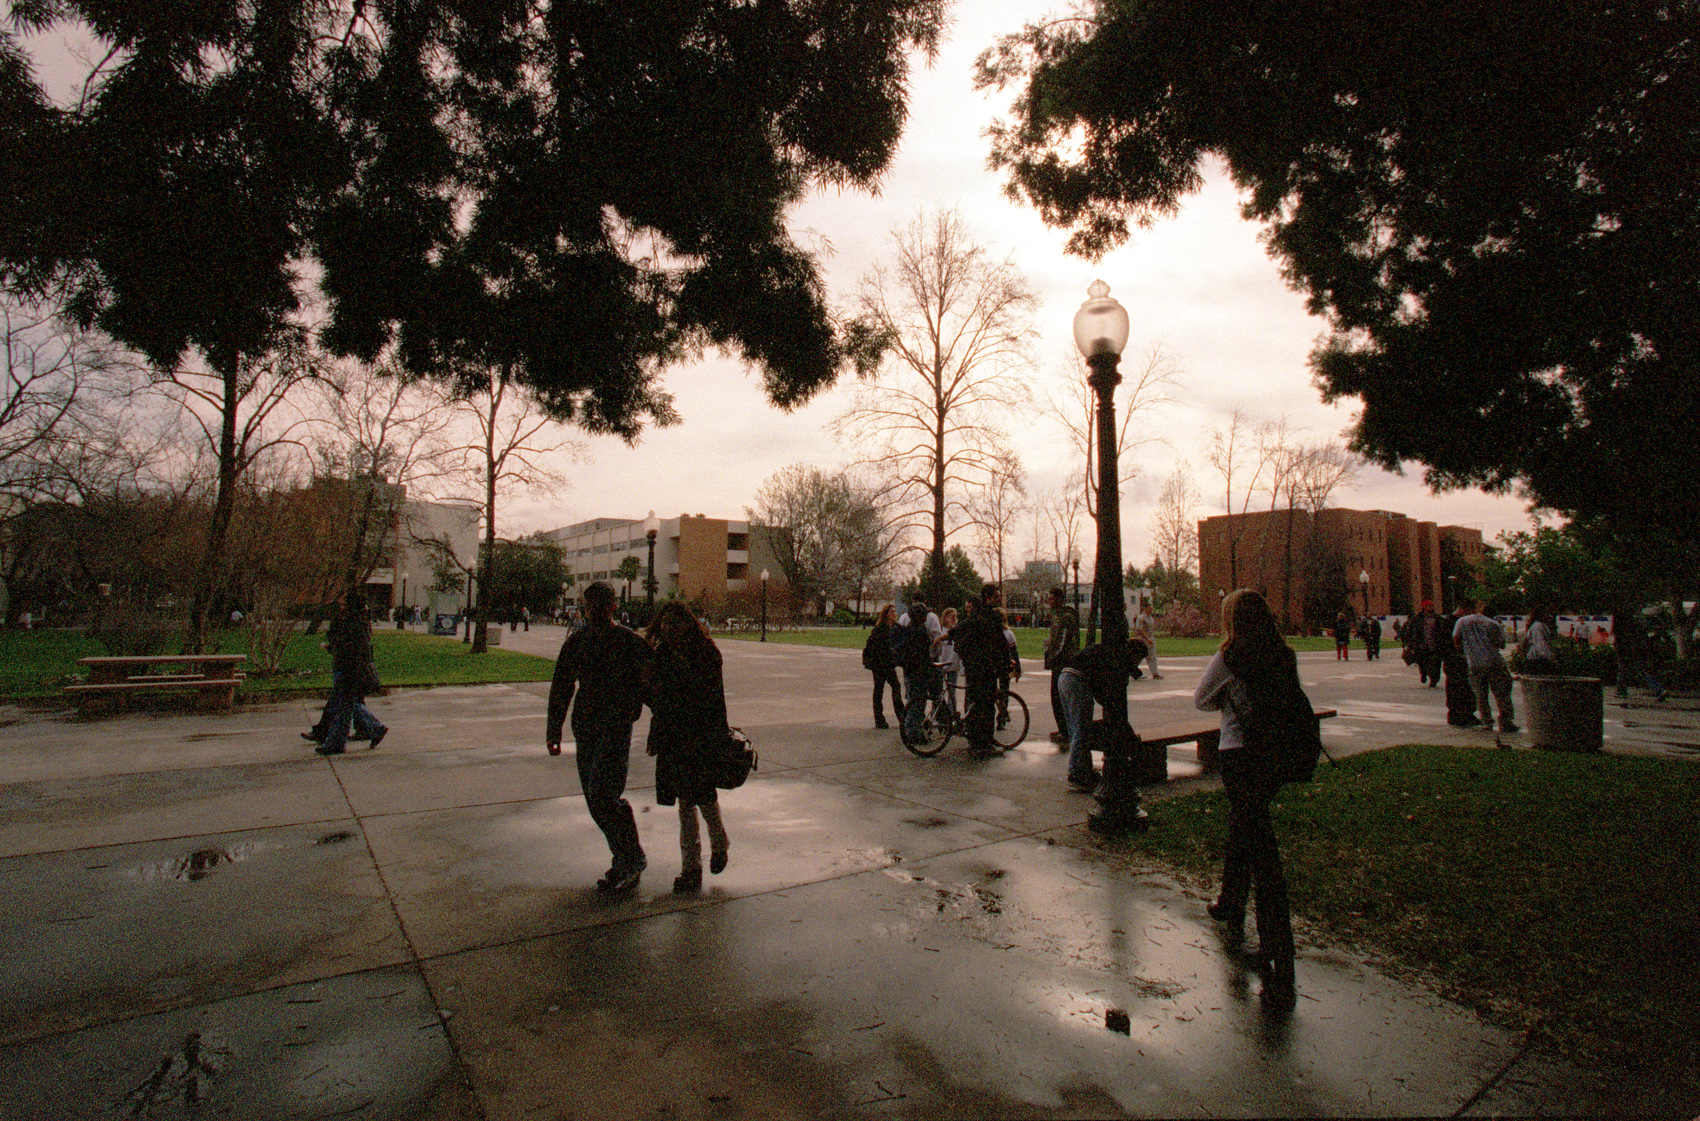 Students walk though campus on the first day of the Spring semester at Calif. State University North